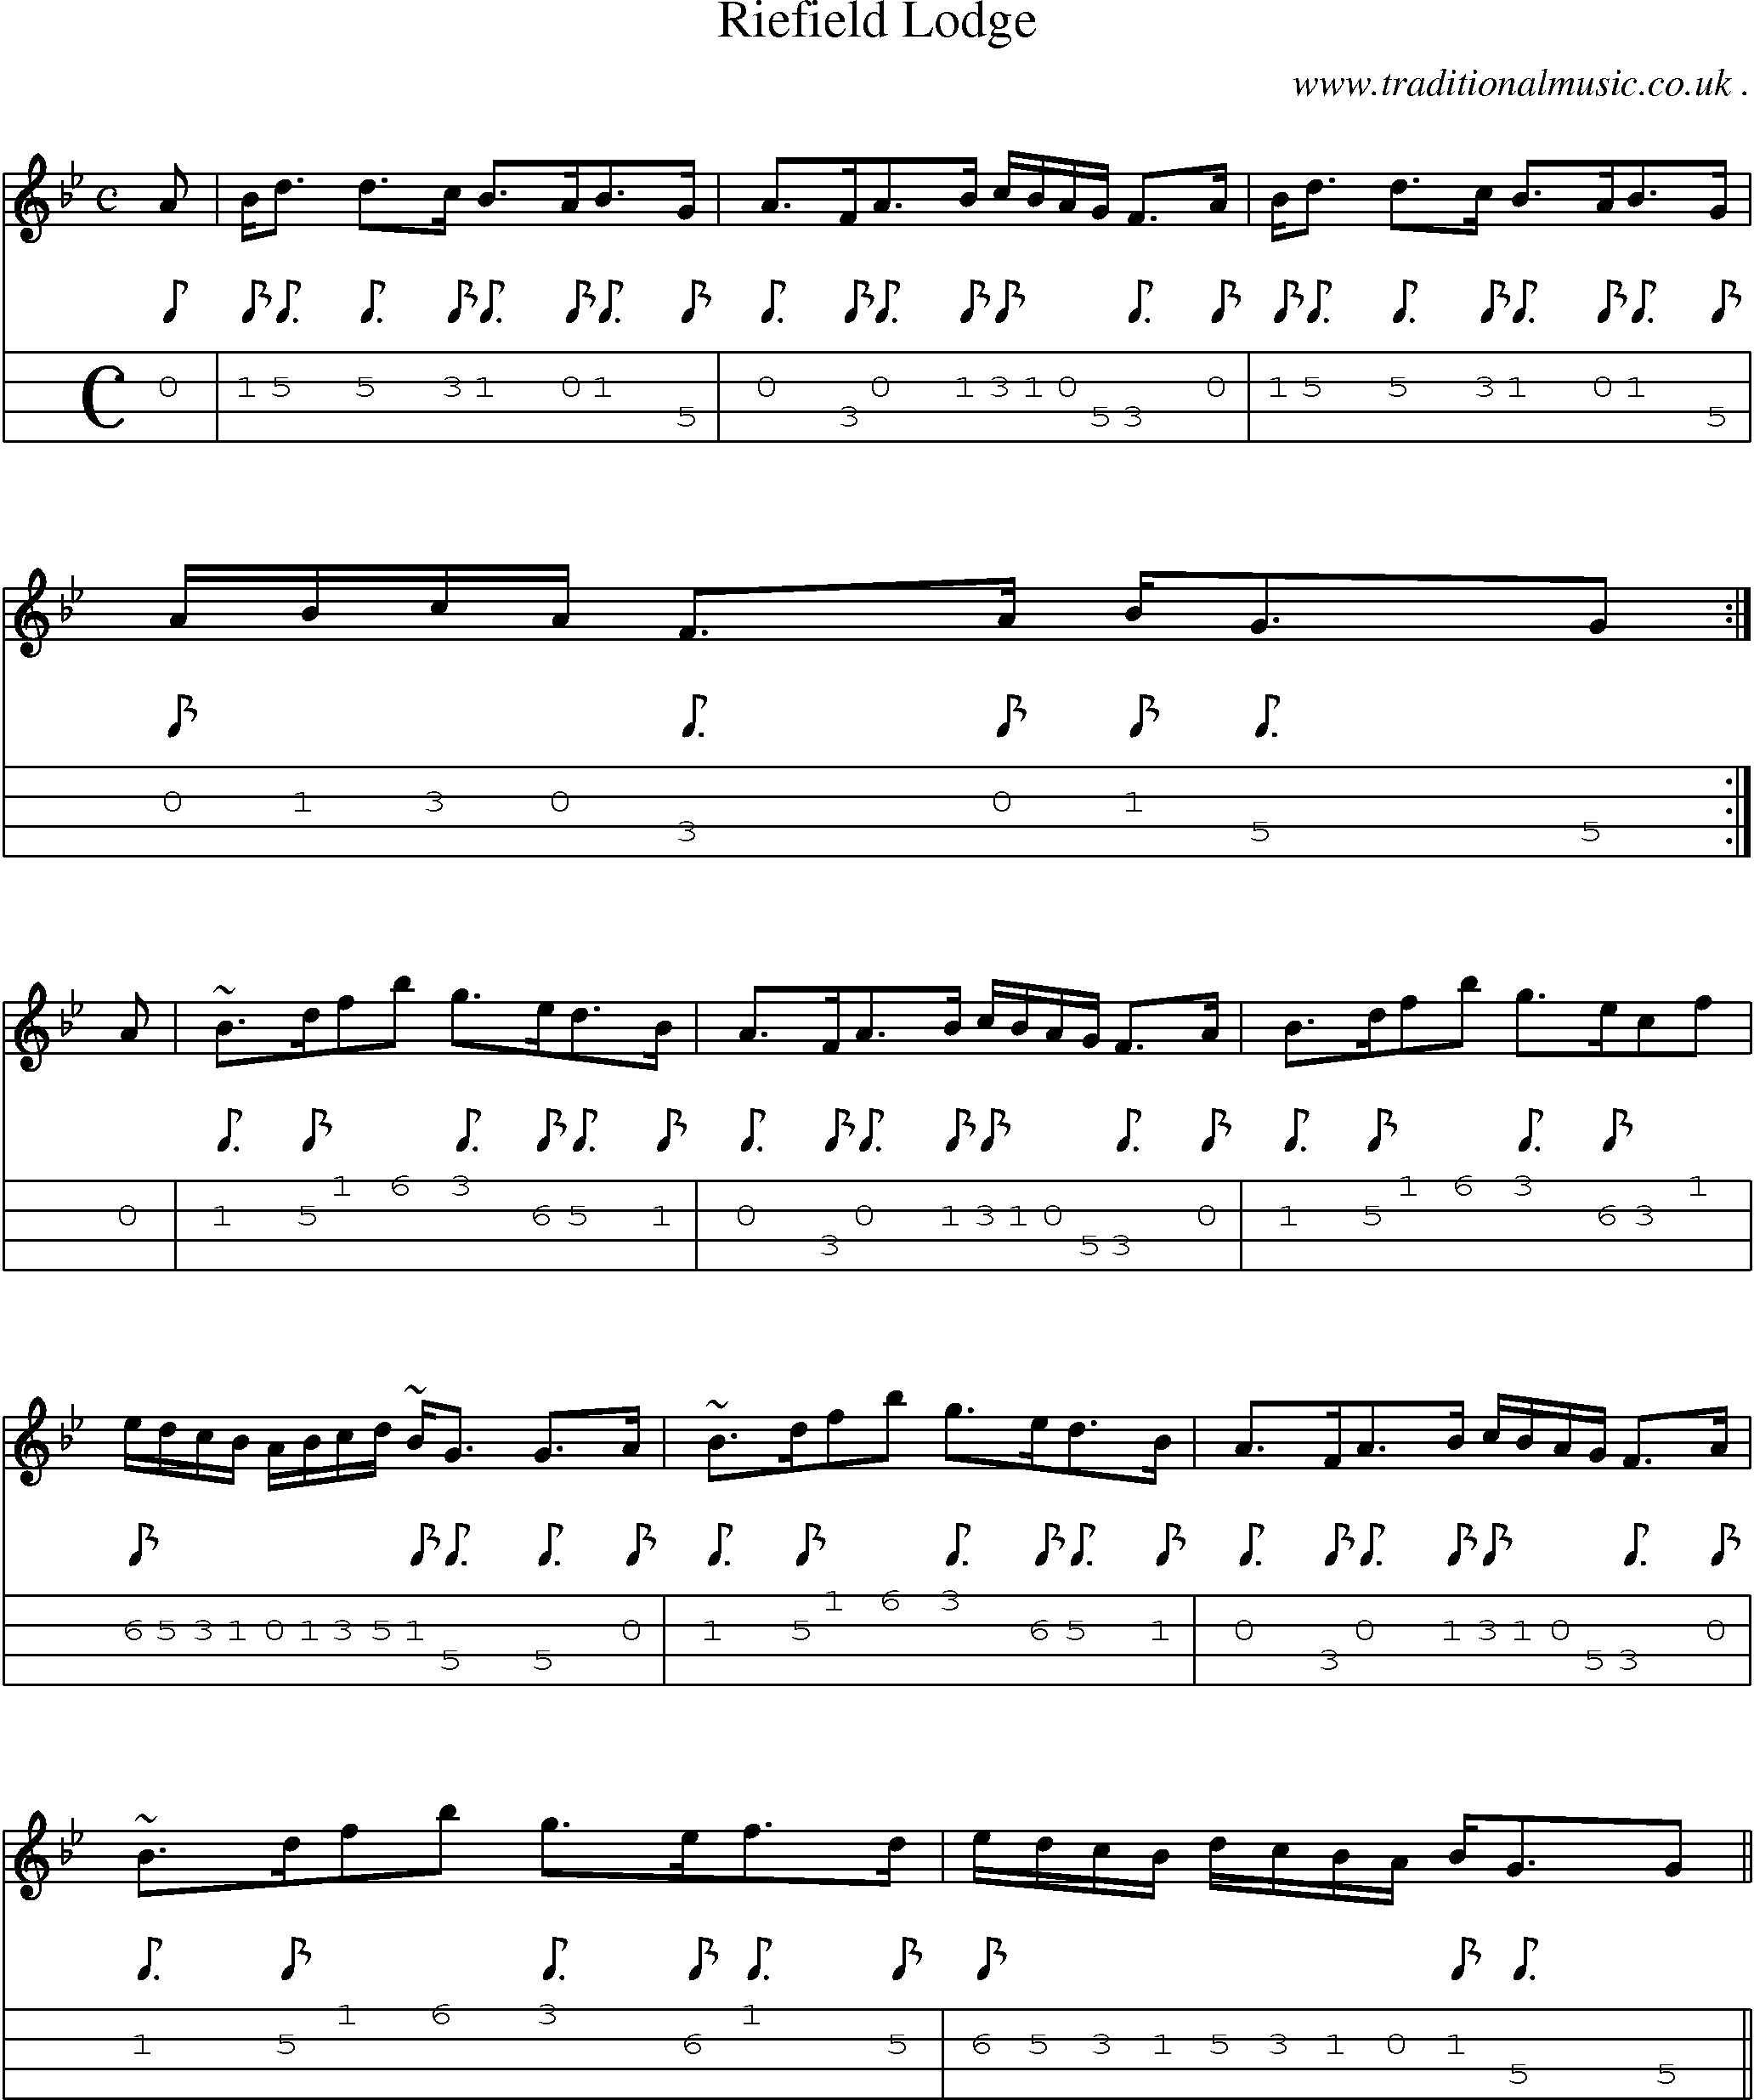 Sheet-music  score, Chords and Mandolin Tabs for Riefield Lodge